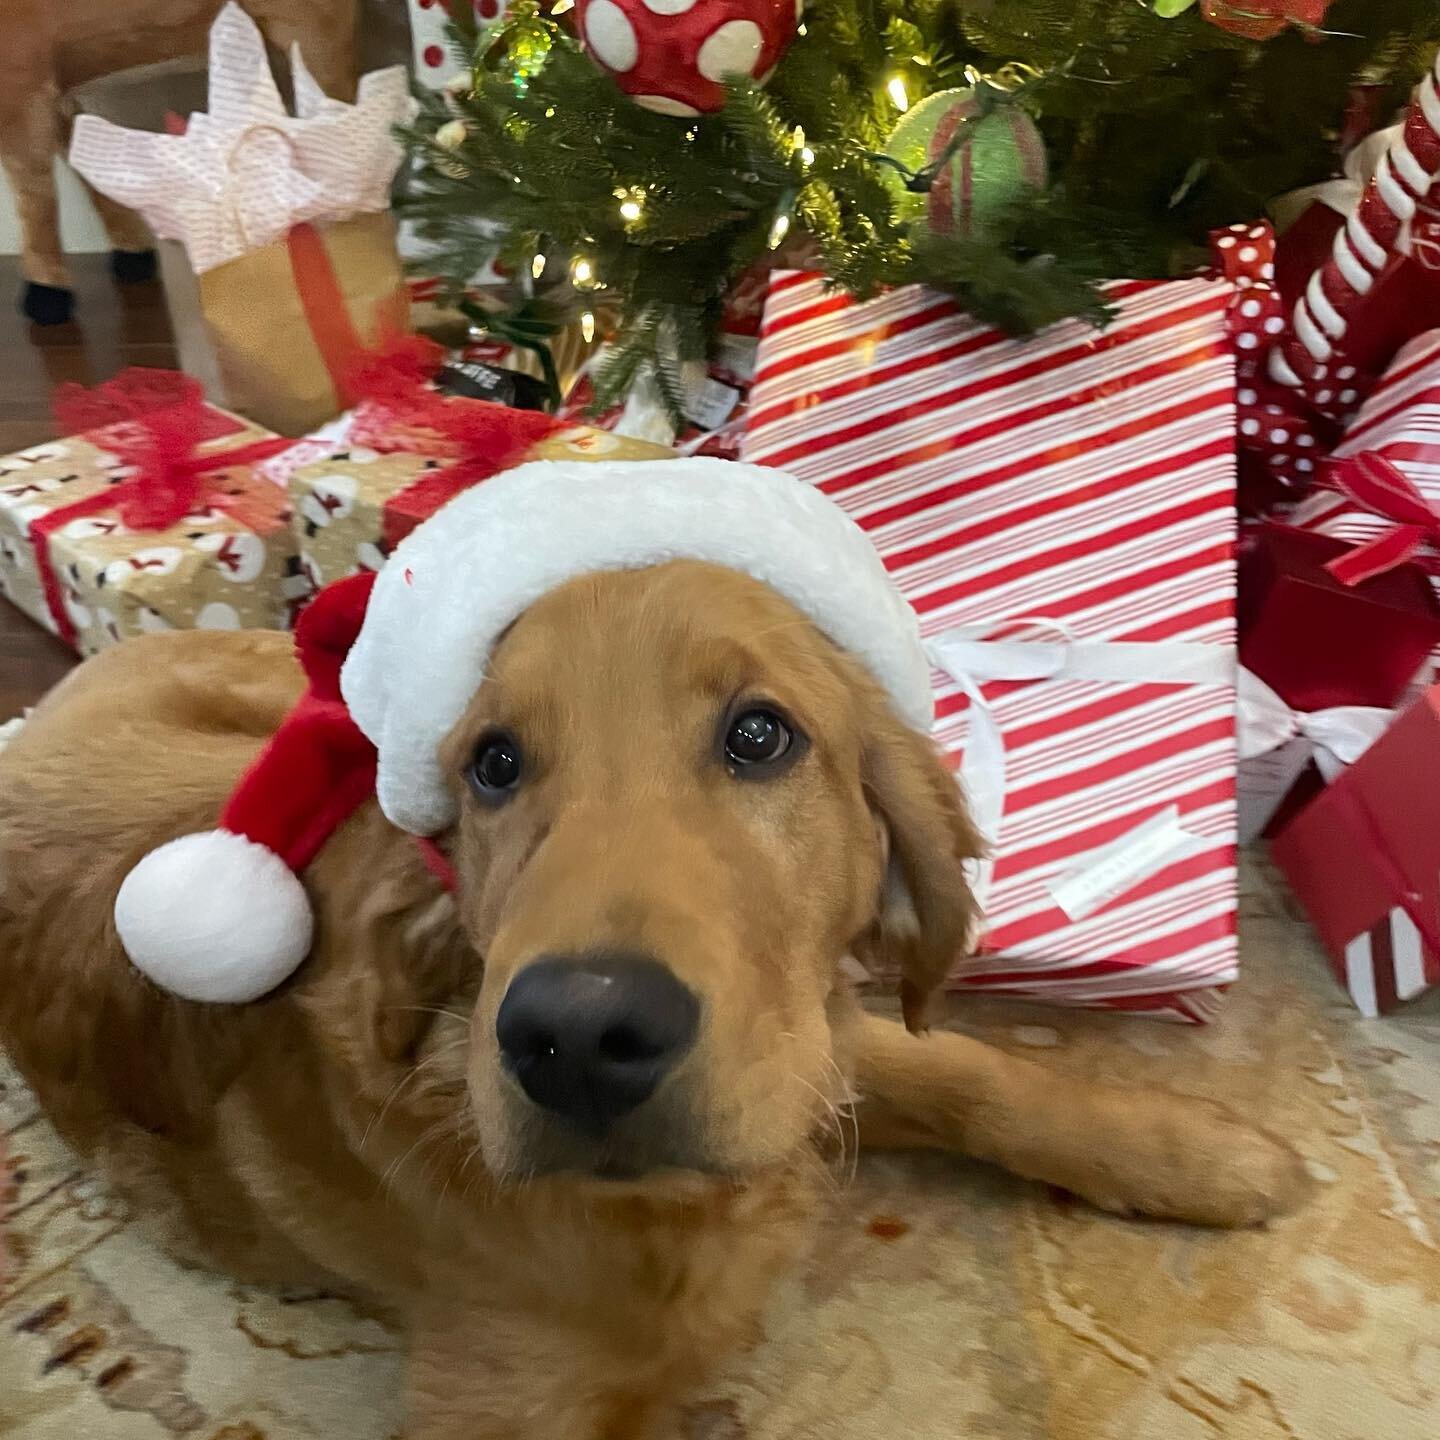 Merry Christmas from the Labs for Liberty family!